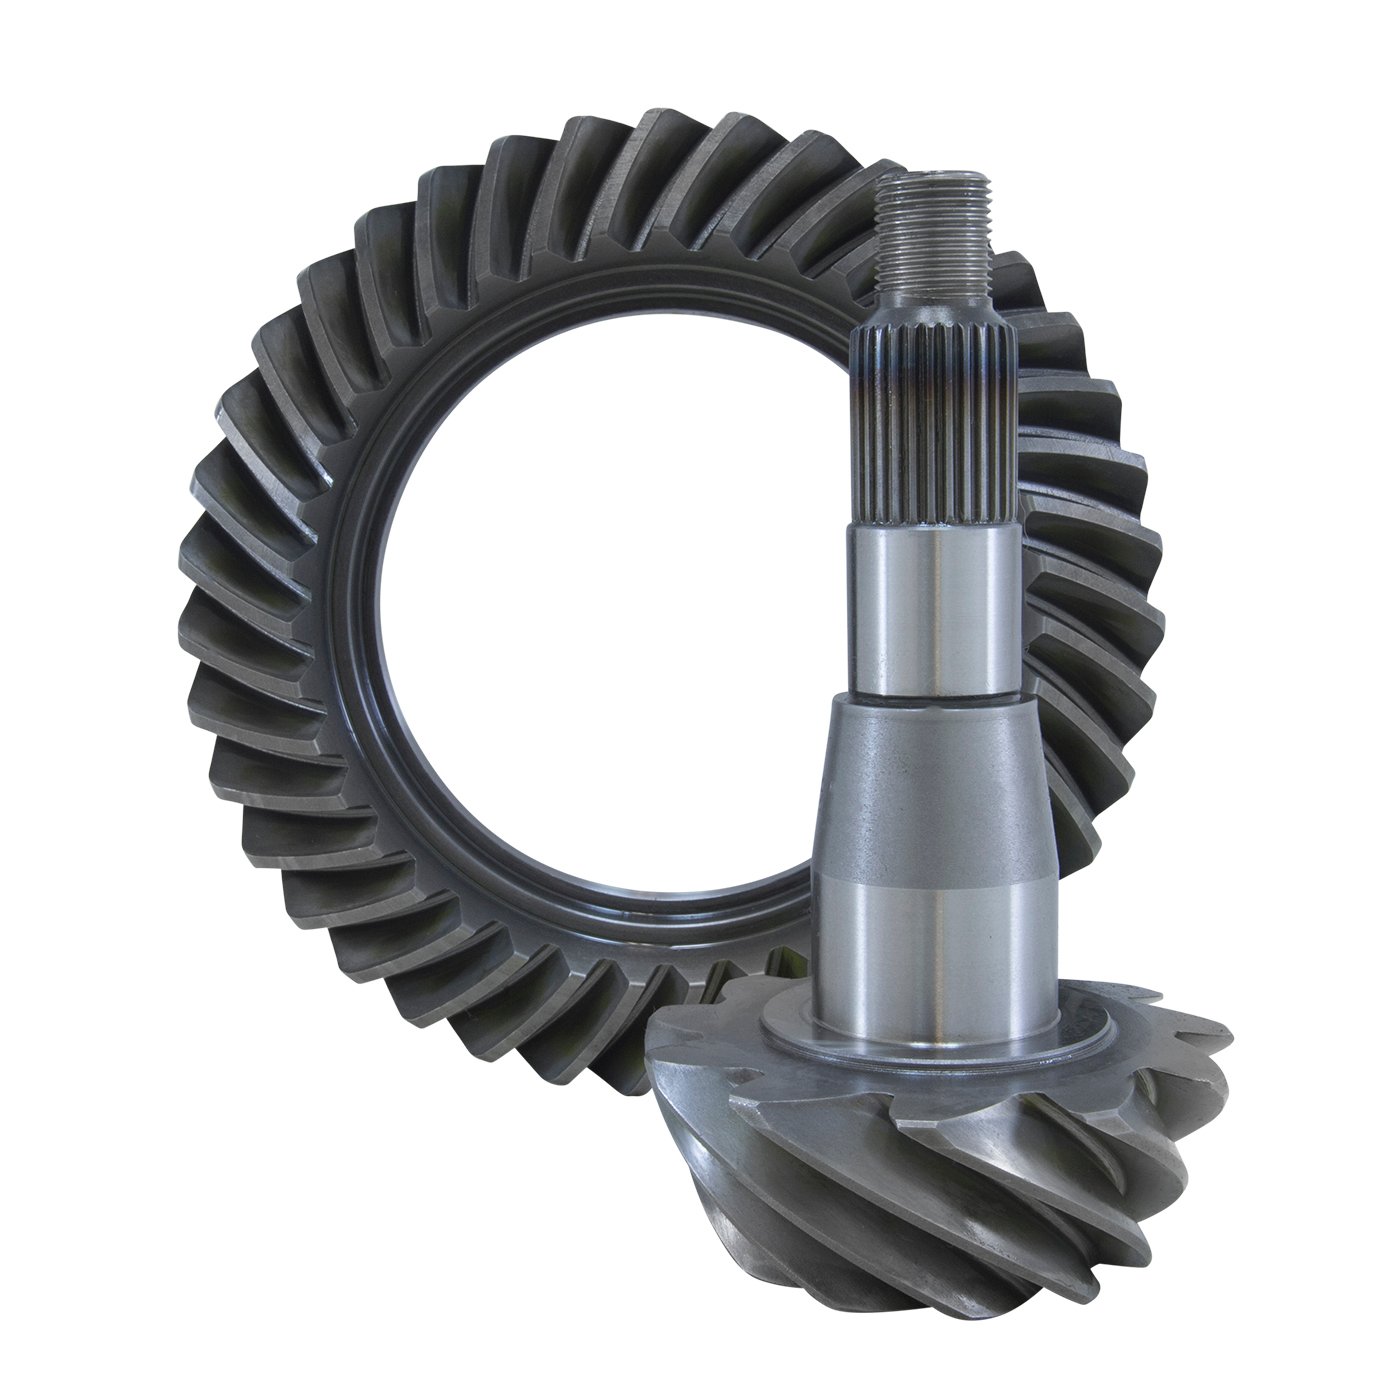 USA Standard 36359 Ring & Pinion Gear Set, For '11 & Up Chrysler 9.25 Zf, 3.90 Ratio